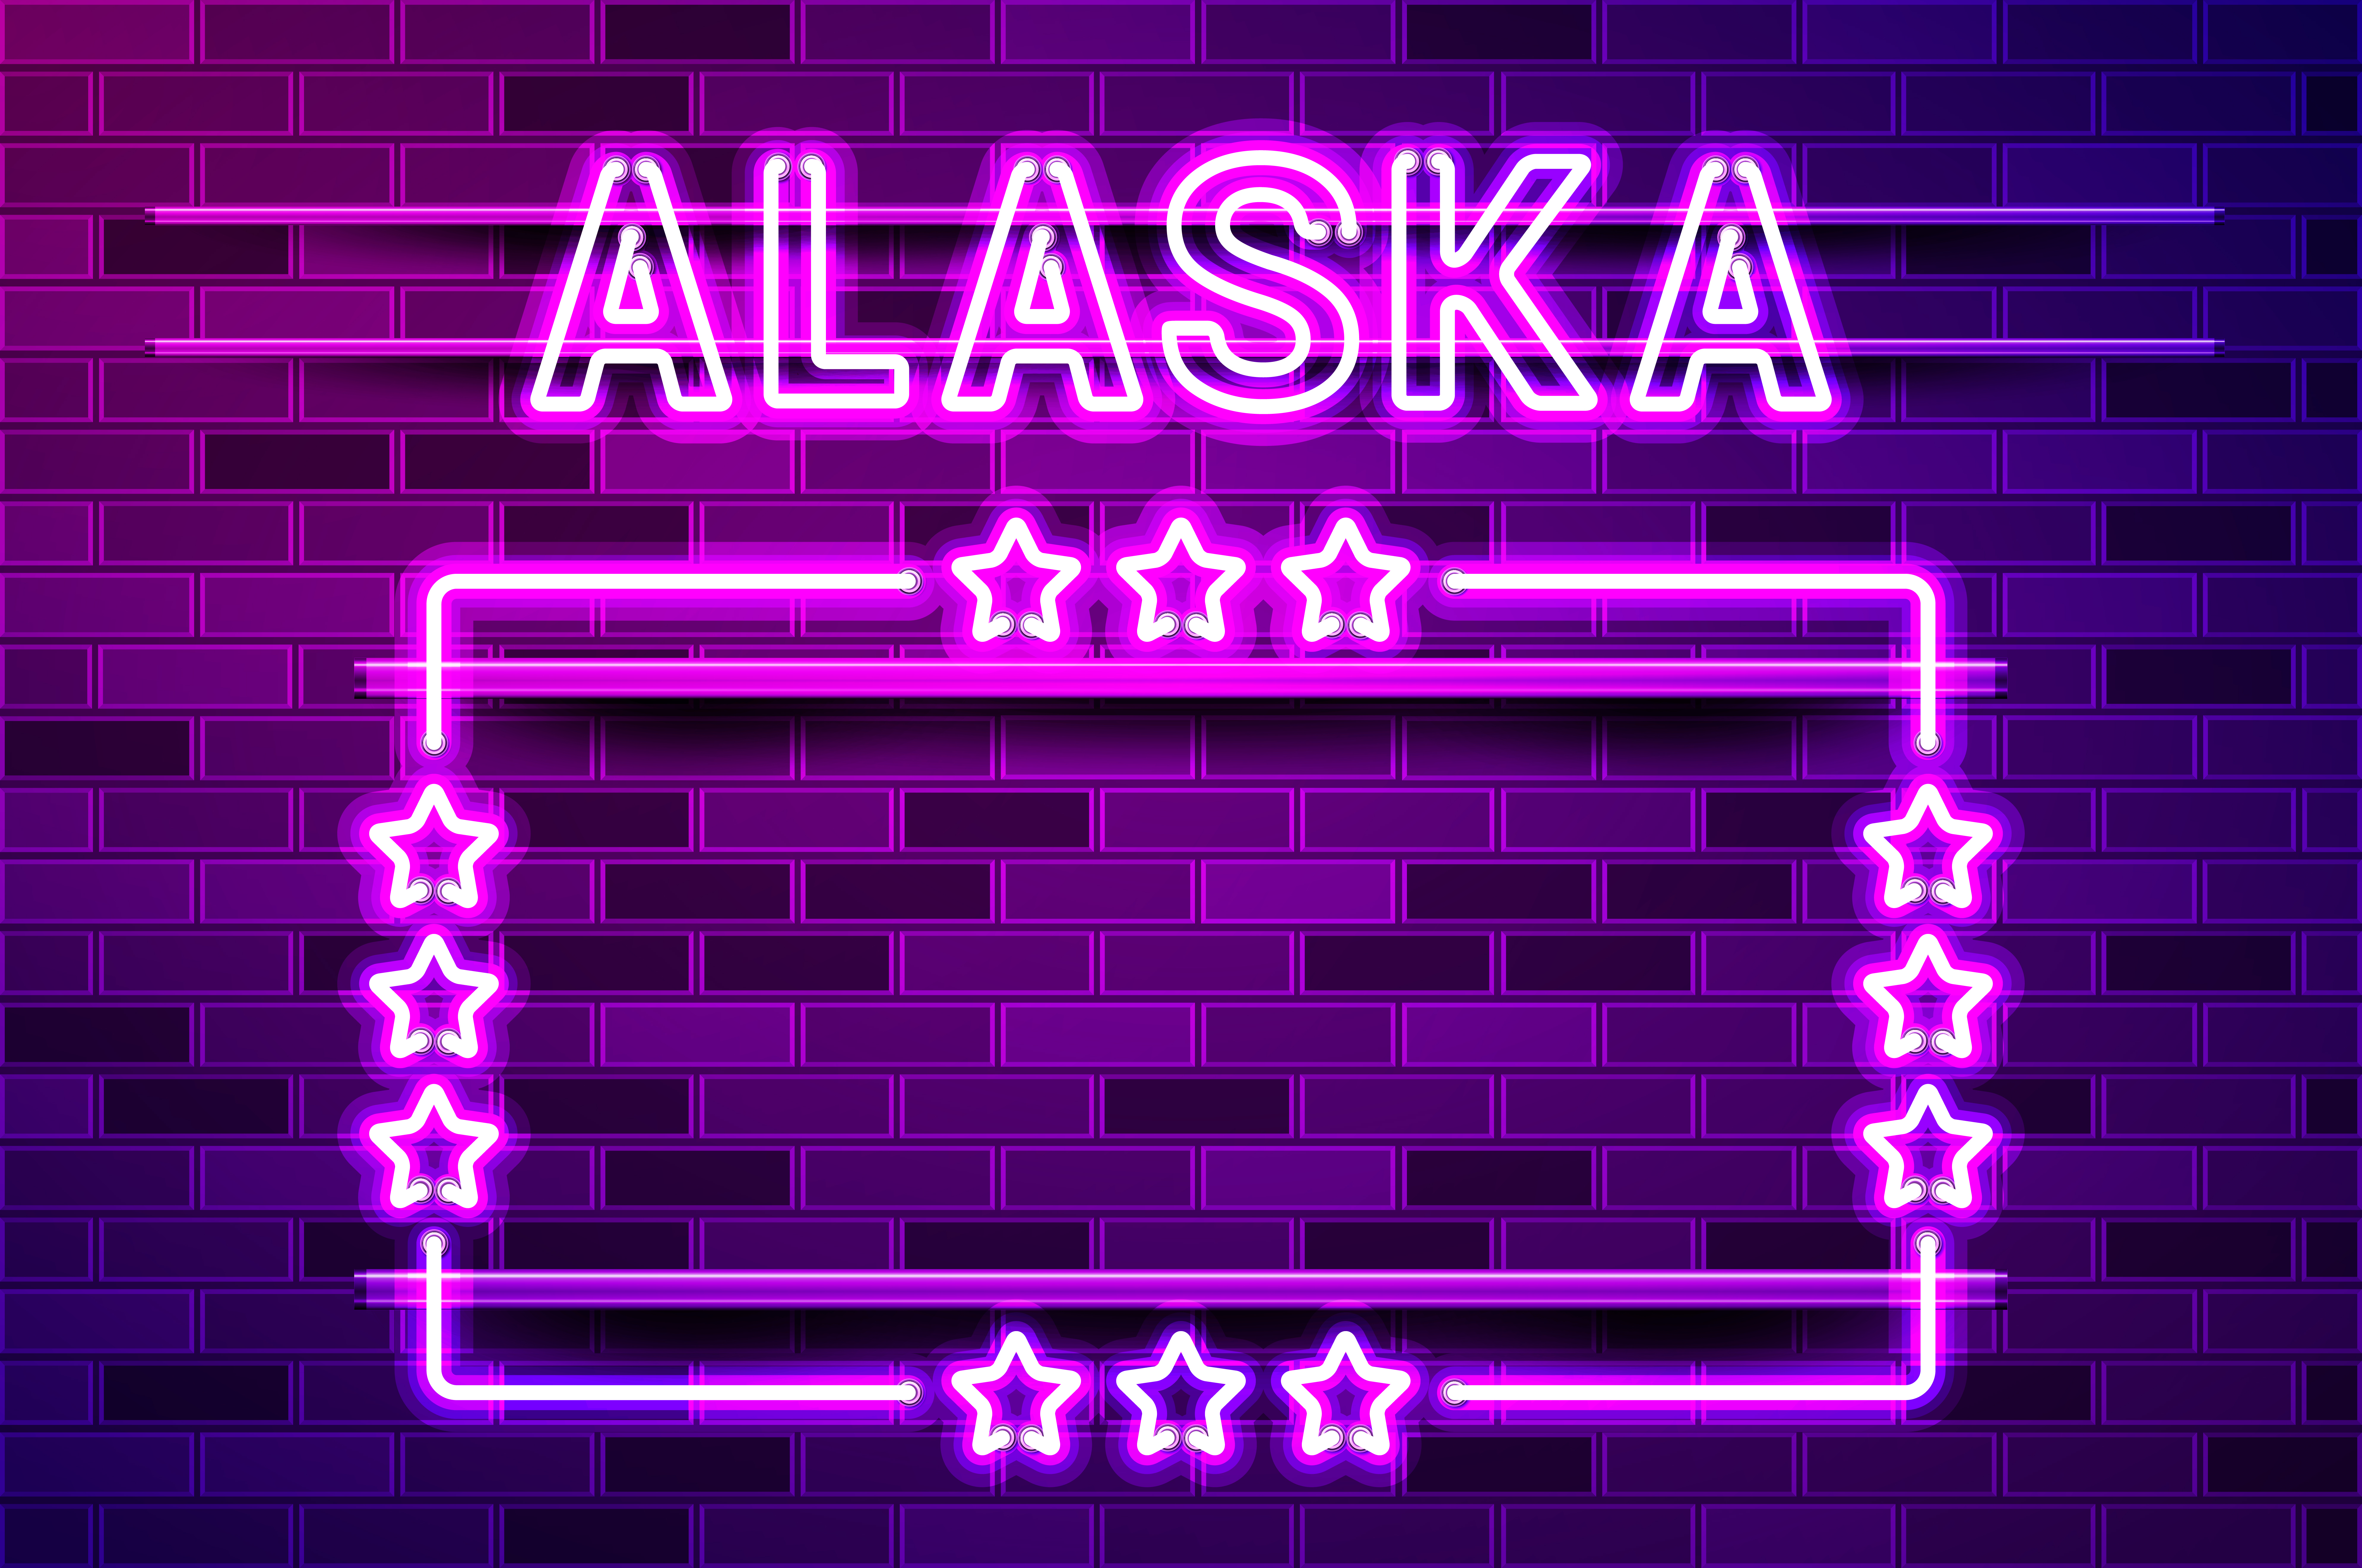 Alaska US State glowing purple neon lettering and a rectangular frame with stars. Realistic vector illustration. Purple brick wall, violet glow, metal holders.. Alaska US State glowing purple neon lettering and a rectangular frame with stars